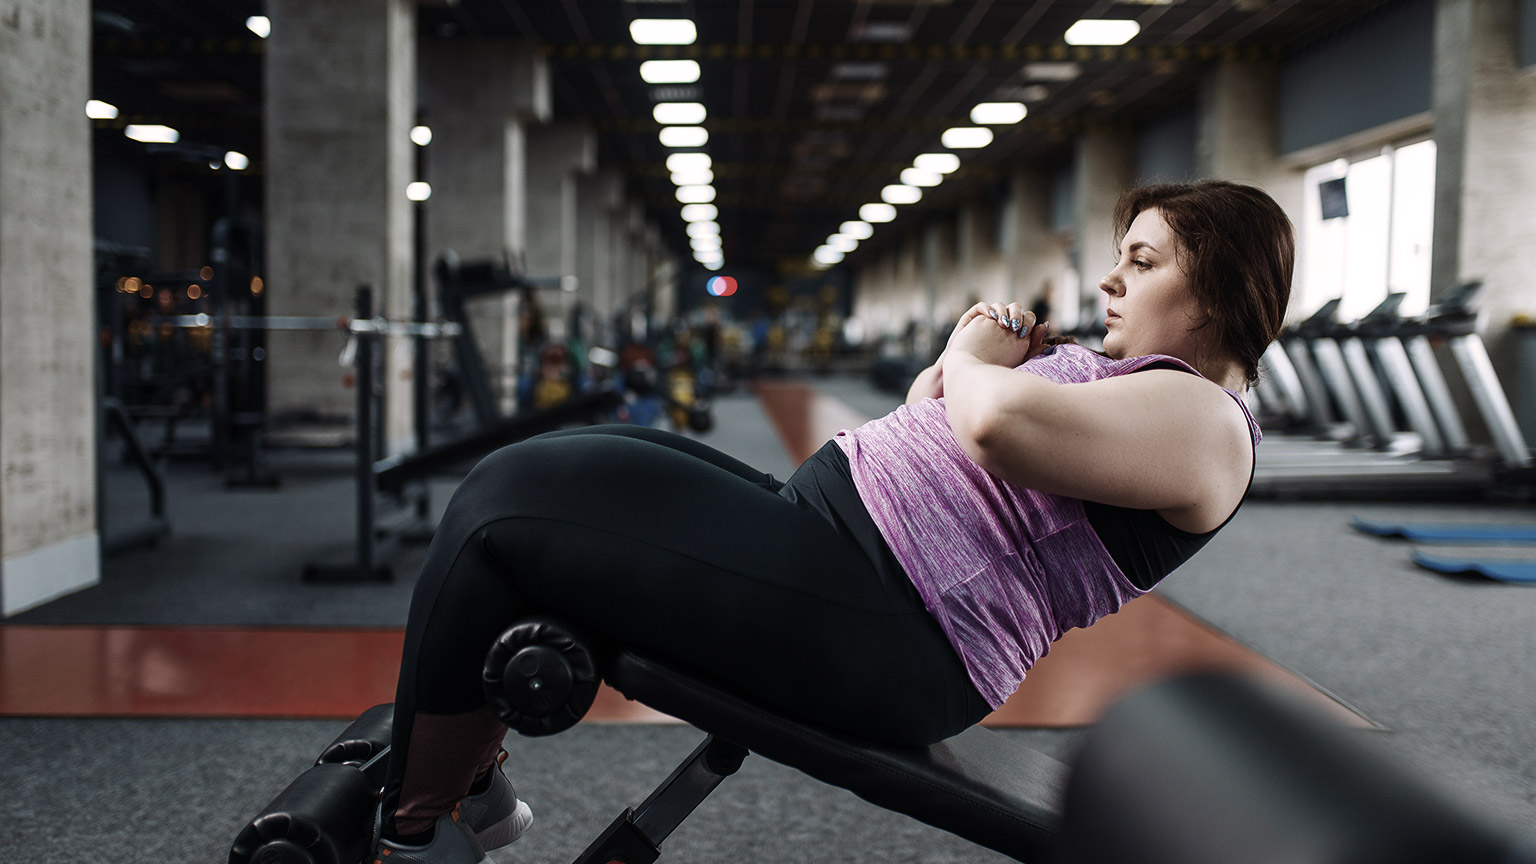 Overweight woman exercising on gym